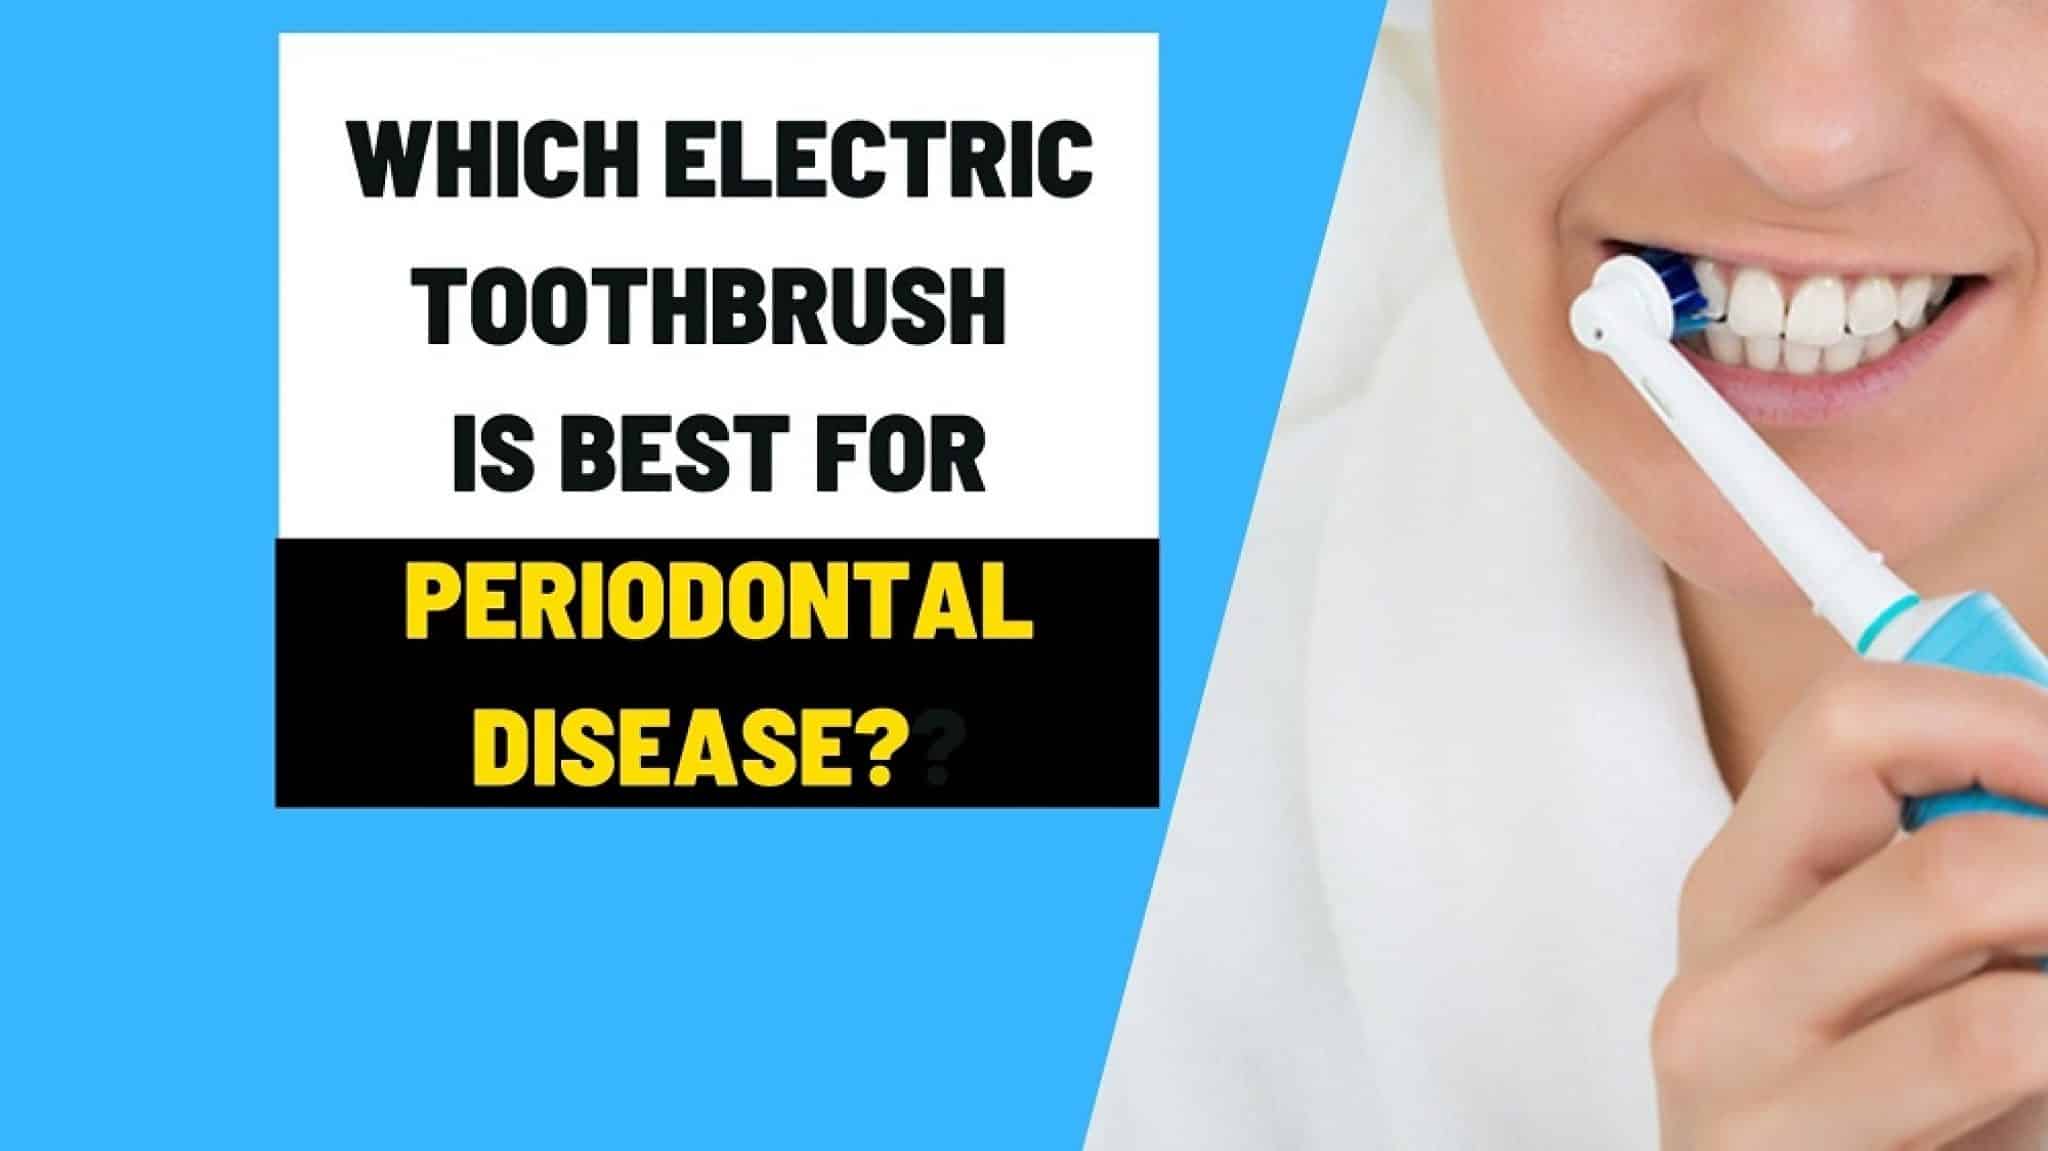 Which electric toothbrush is best for periodontal disease?